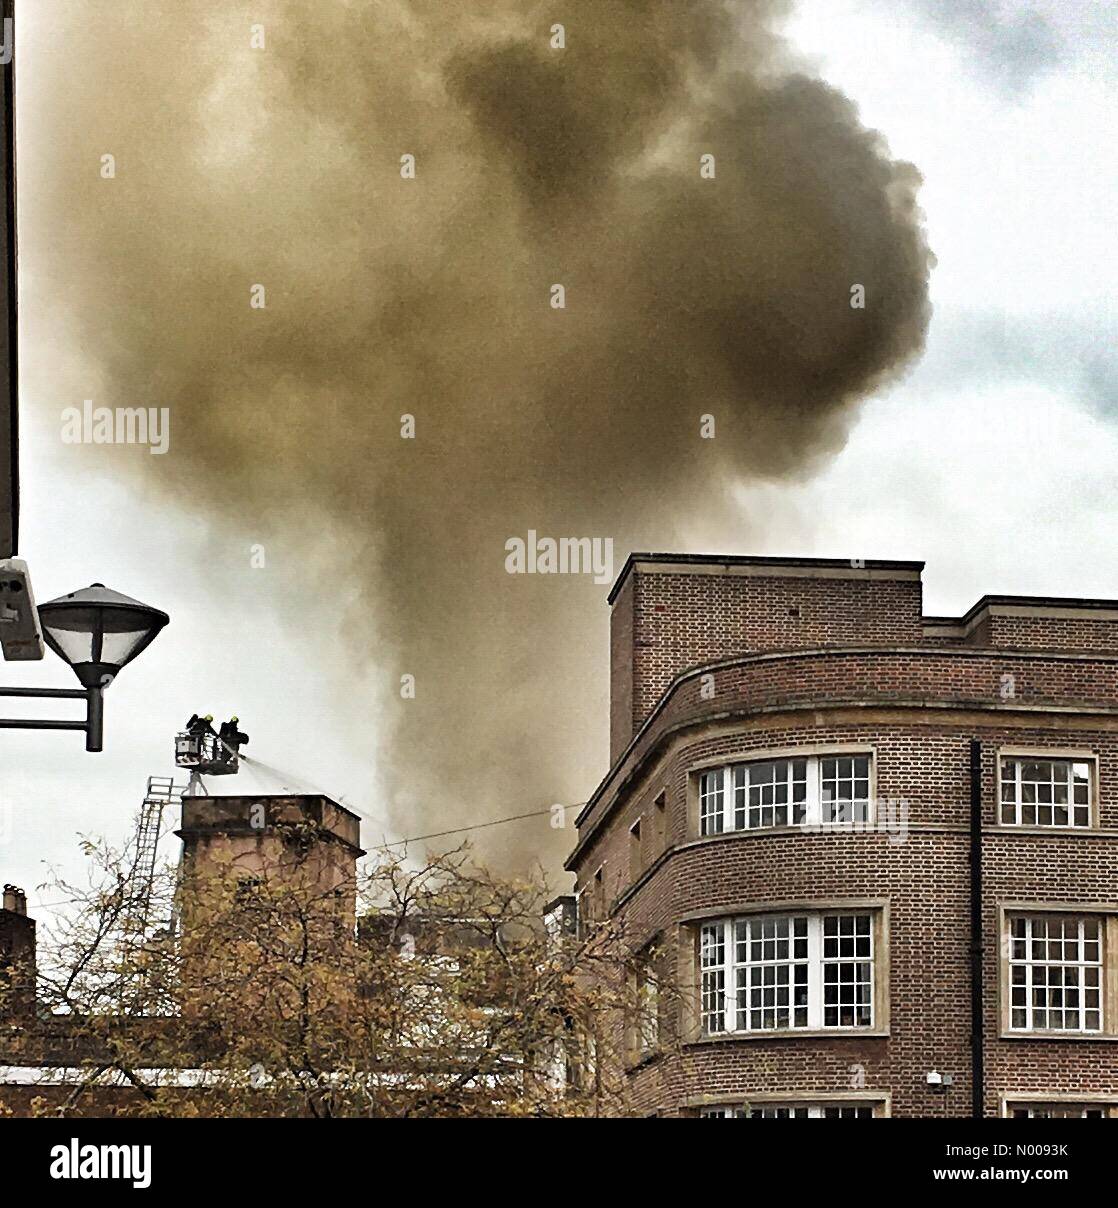 Fire spreads in Exeter. Fire fighters tackle blaze in Cathedral square. Stock Photo